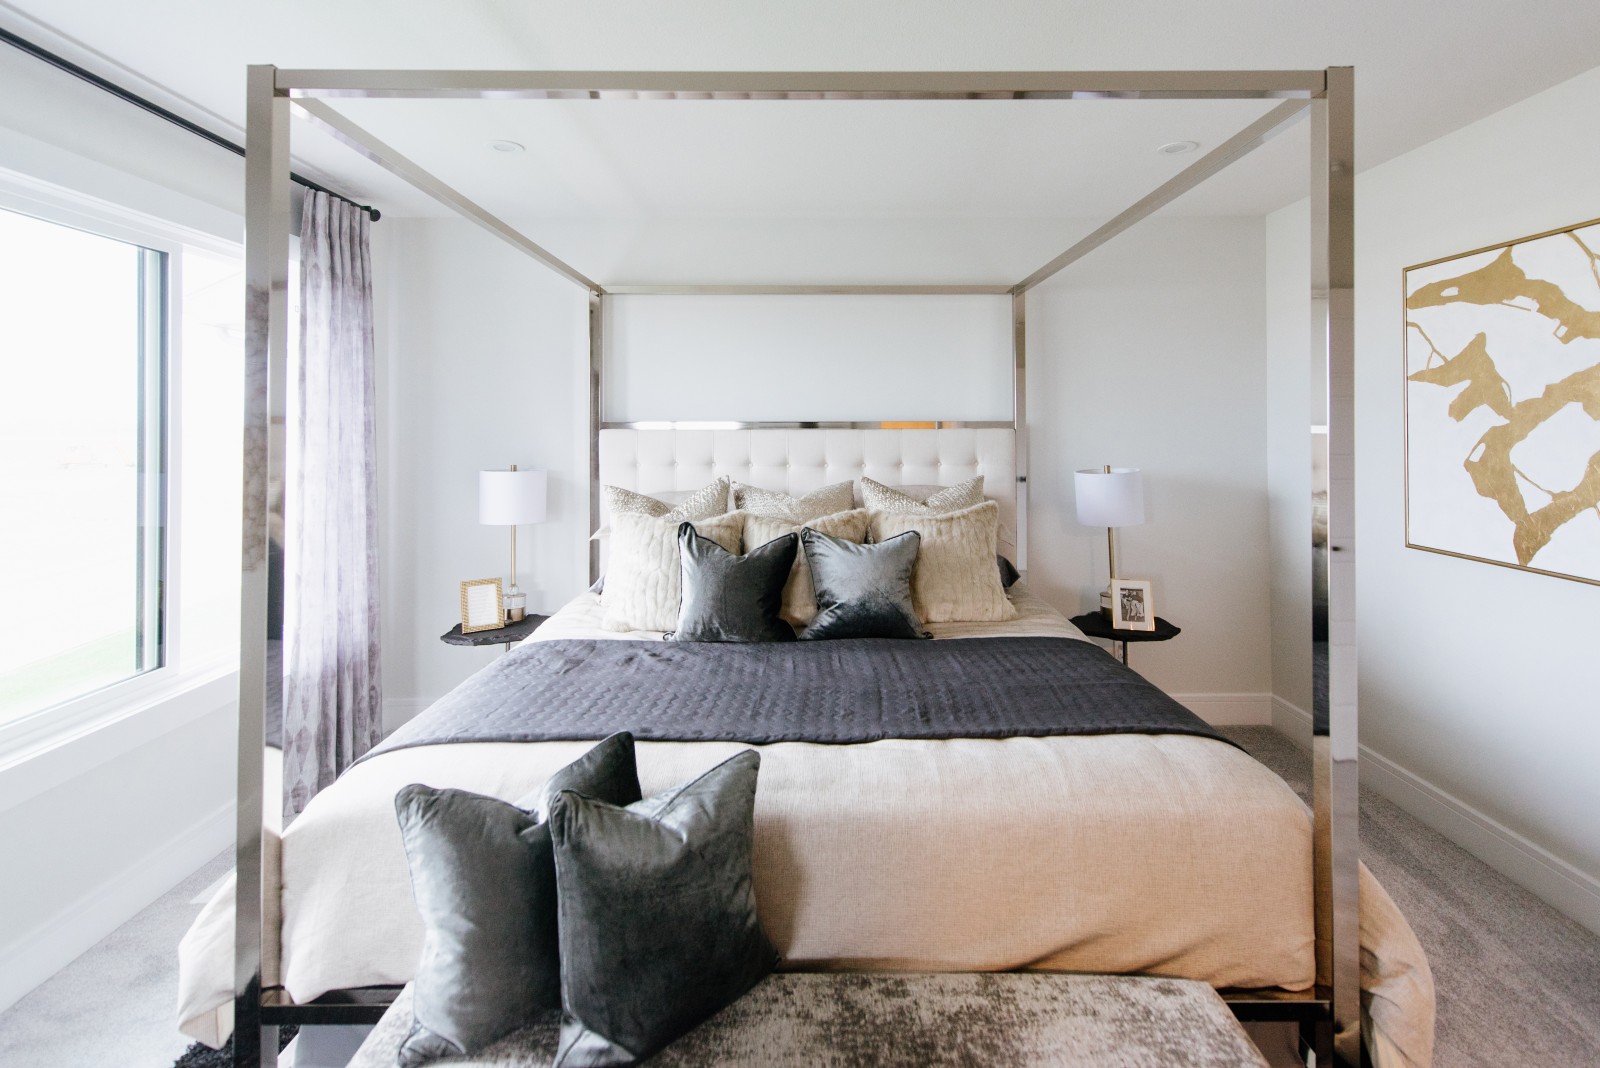 Modern master bedroom featuring sleek, chrome canopy bed, and luxurious grey and beige bed linens and pillows